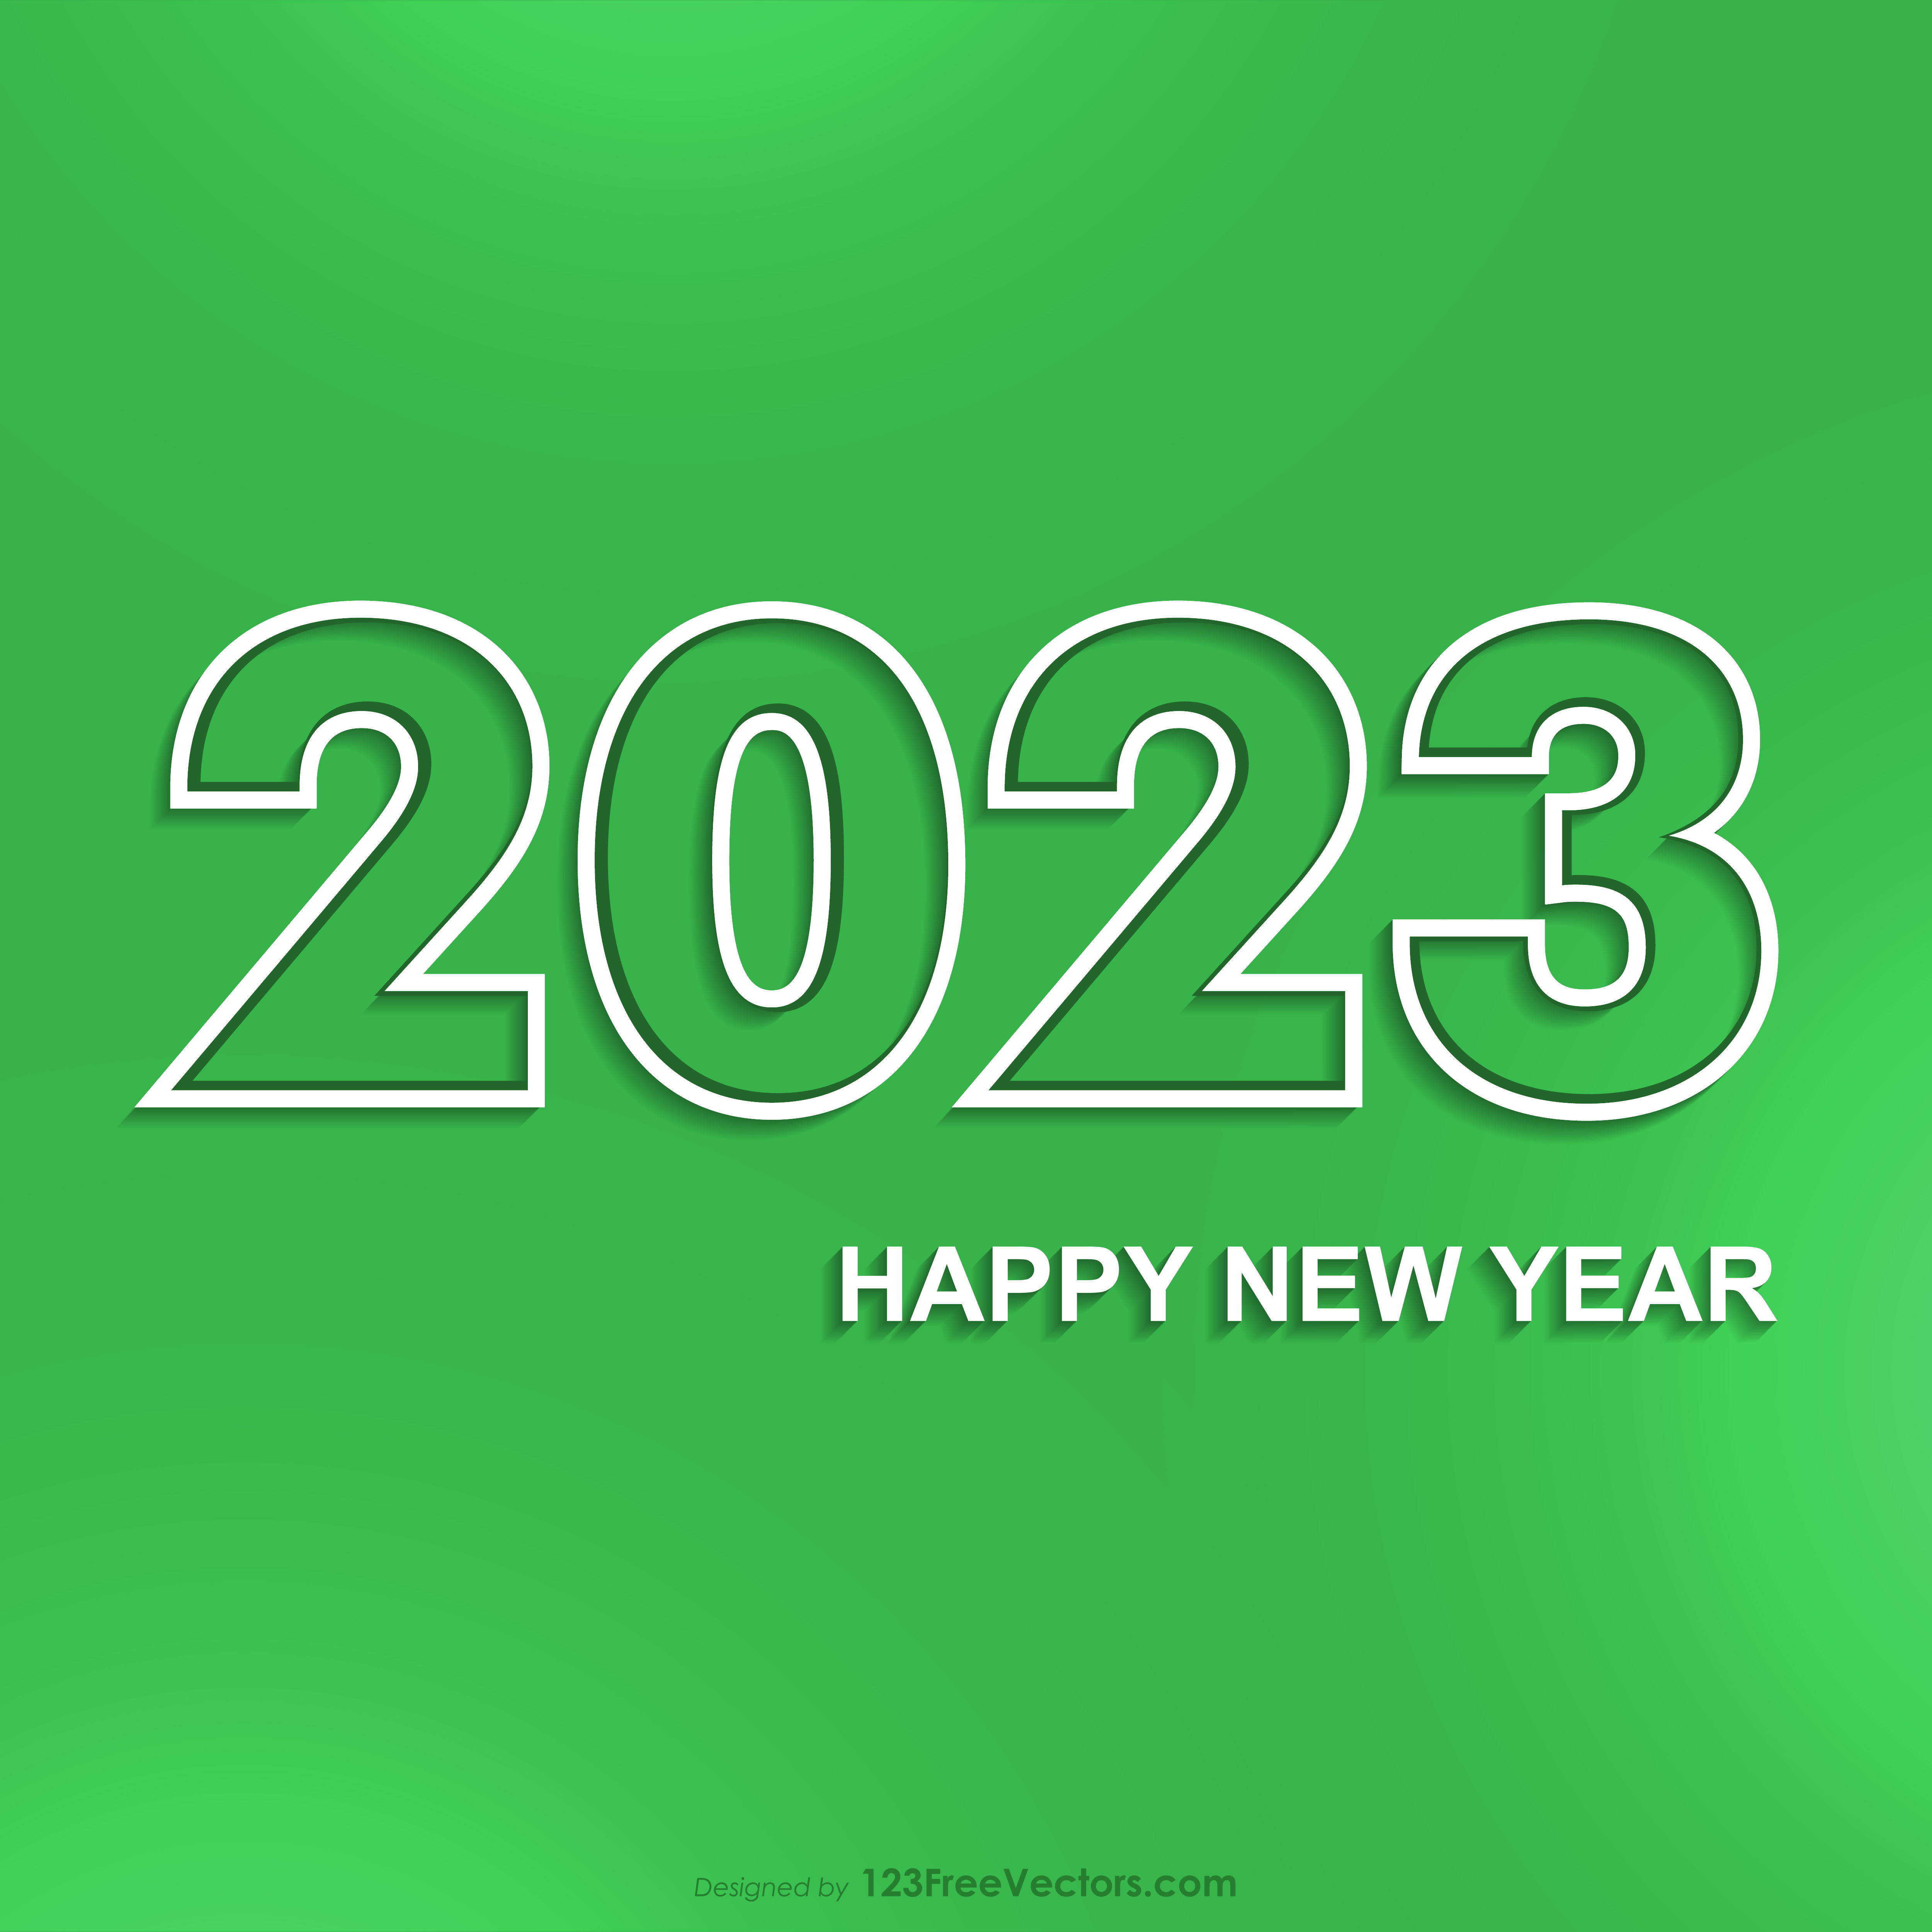 219367 Happy New Year 2023 Green Background 